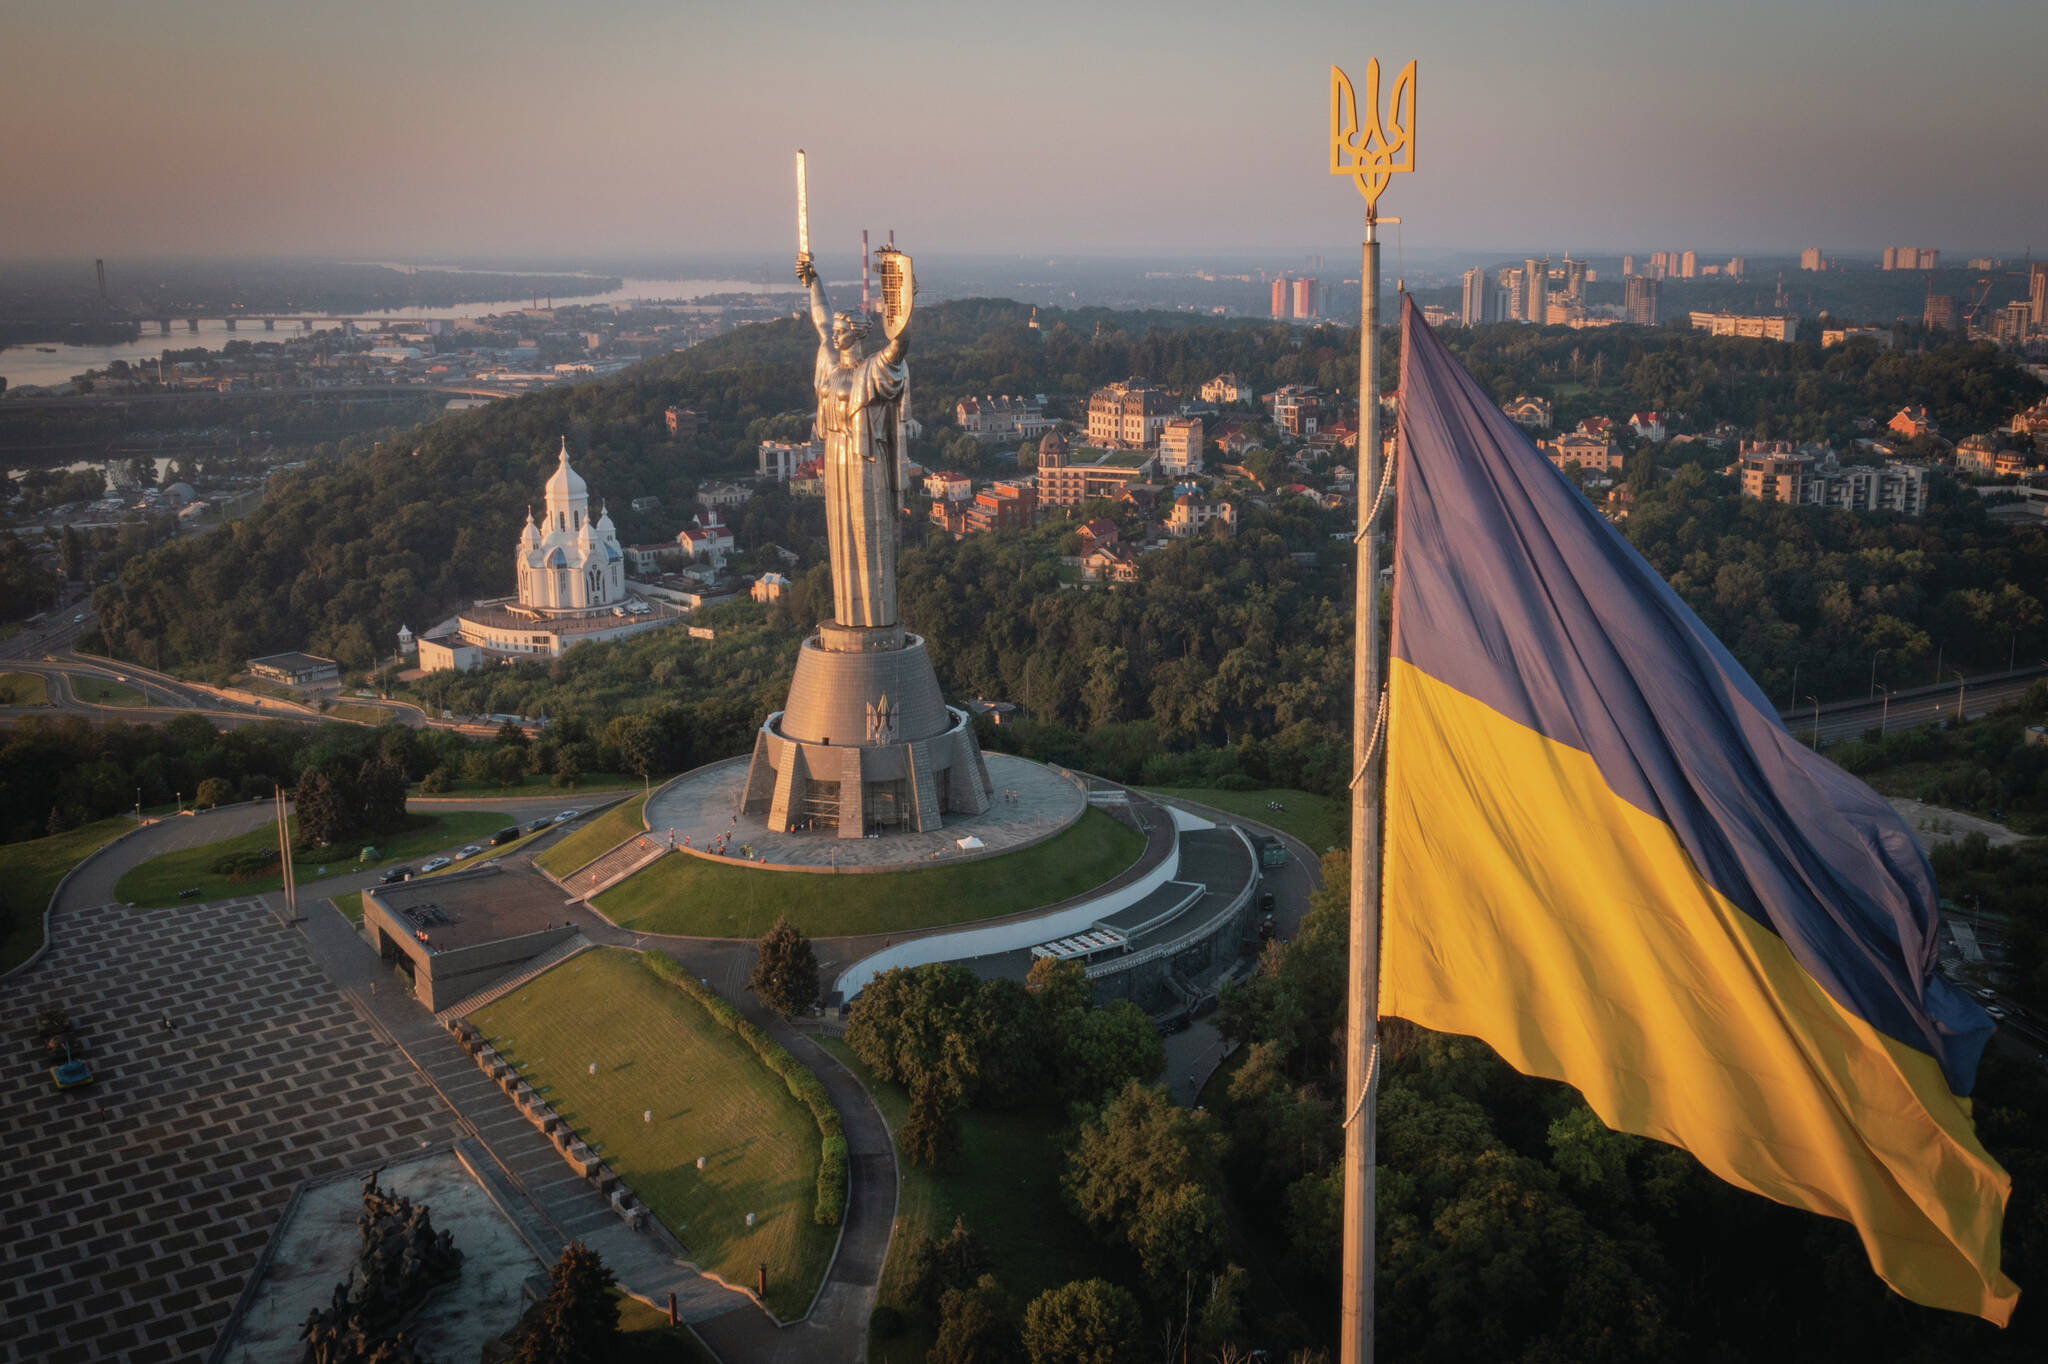 The national flag waves as workers install the Ukrainian coat of arms on the shield in the hand of the country’s tallest stature, the Motherland Monument, after the Soviet coat of arms was removed, in Kyiv, Ukraine, Sunday, Aug. 6, 2023. Ukraine is accelerating efforts to erase the vestiges of centuries of Soviet and Russian influence from the public space amid the Russian invasion of Ukraine by pulling down monuments and renaming hundreds of streets to honor home-grown artists, poets, military chiefs, and independence leaders. (AP Photo/Efrem Lukatsky)